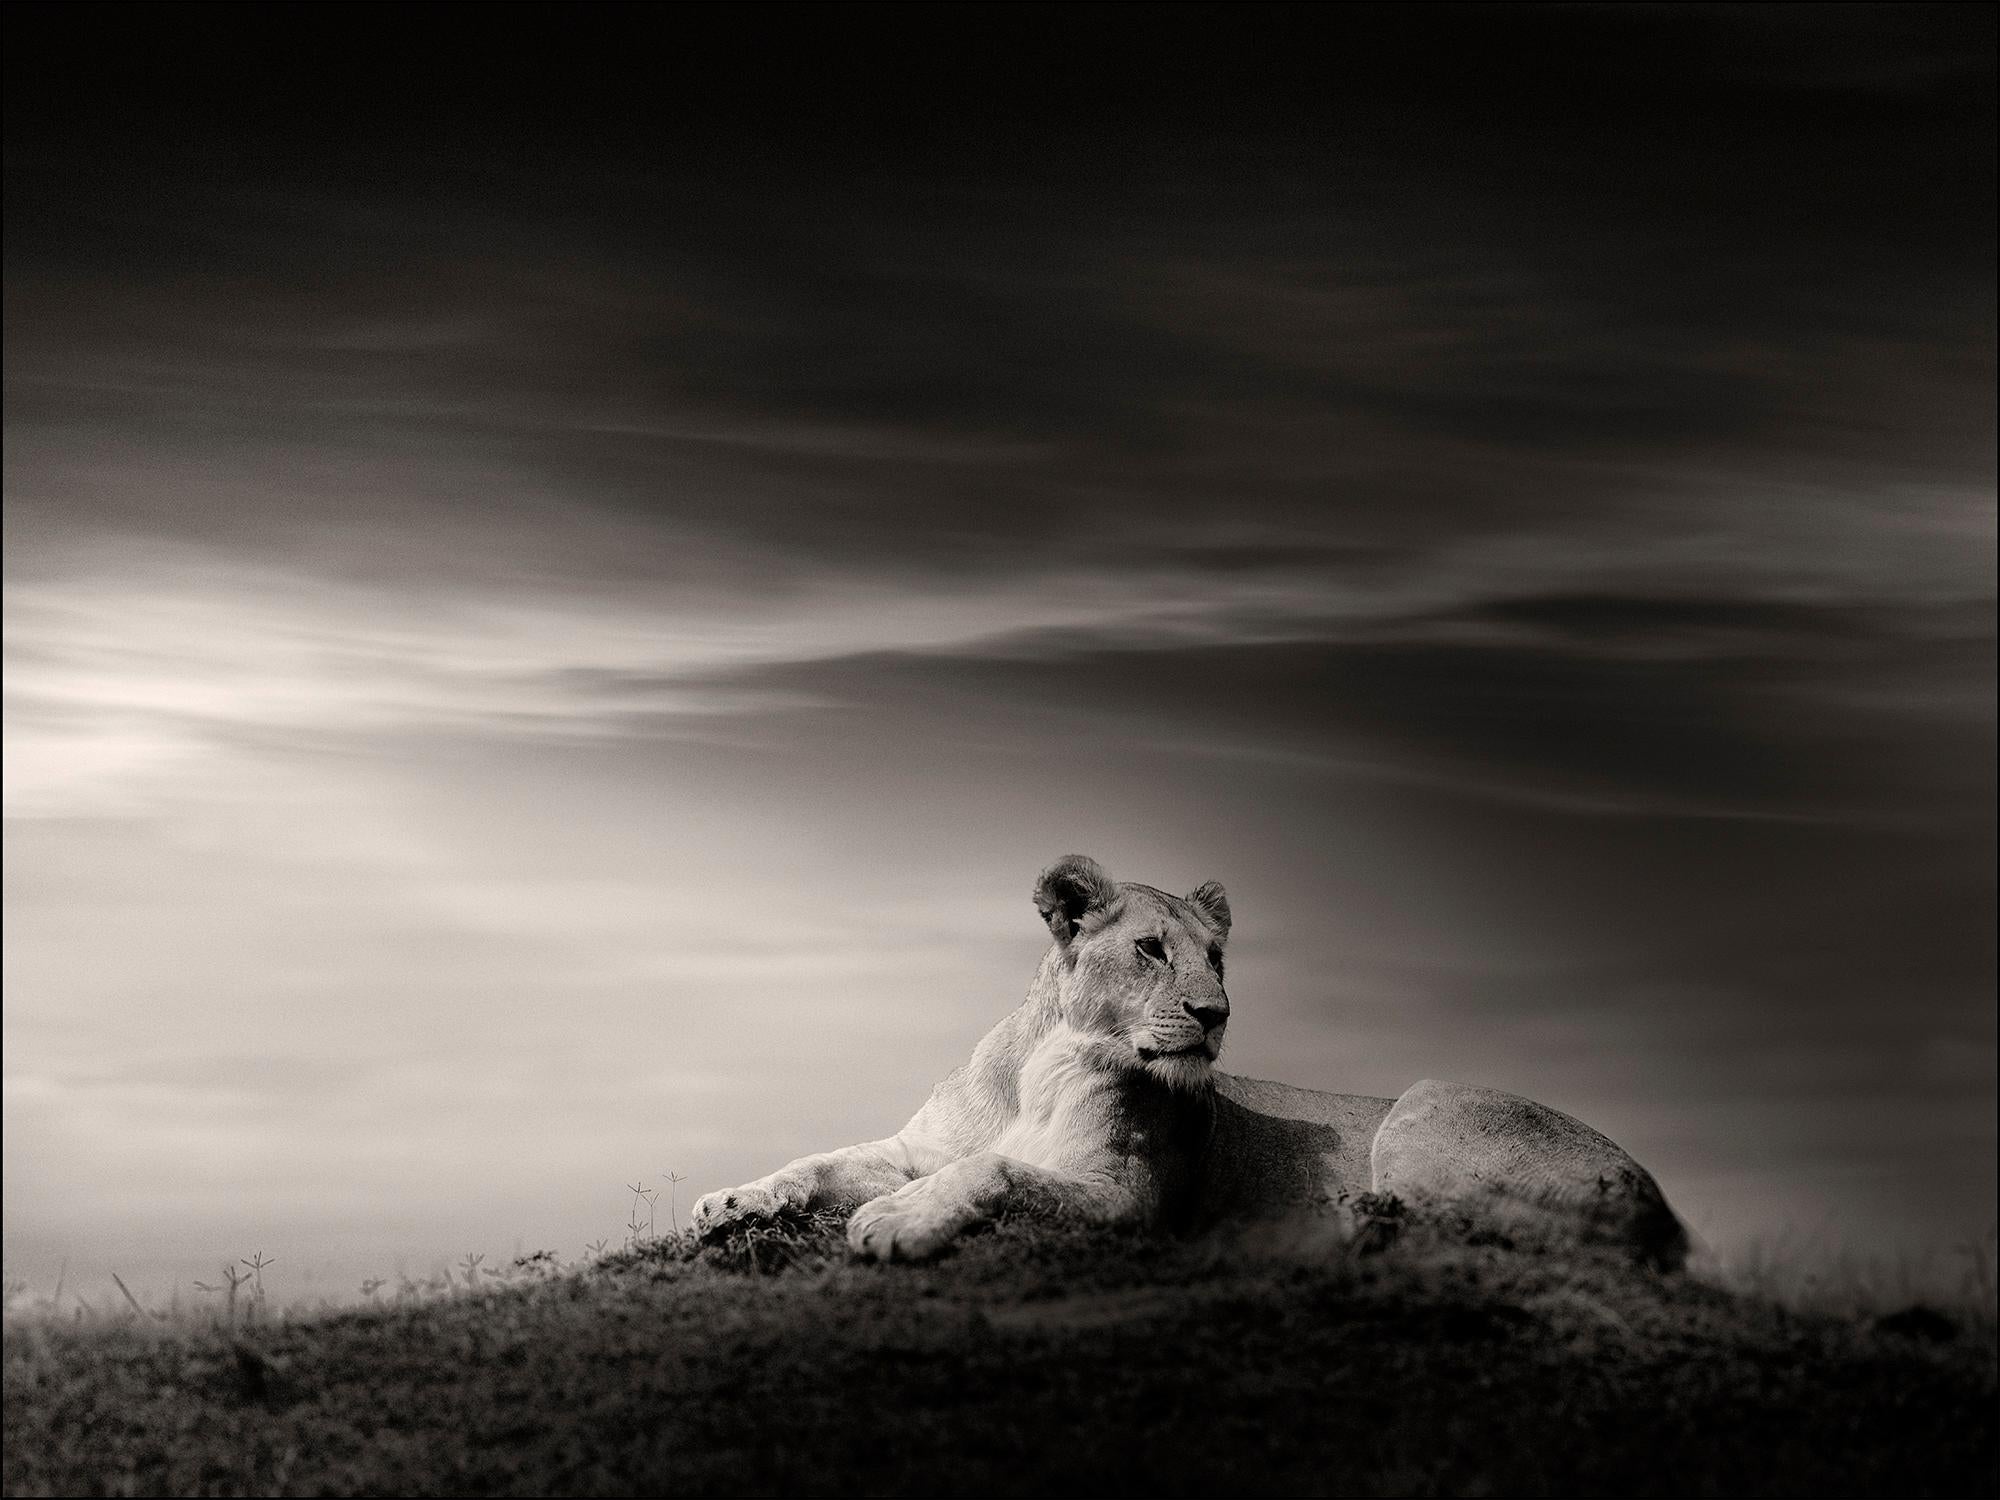 The Lioness, Lion, blackandhwite photography, Africa, Portrait, Wildlife